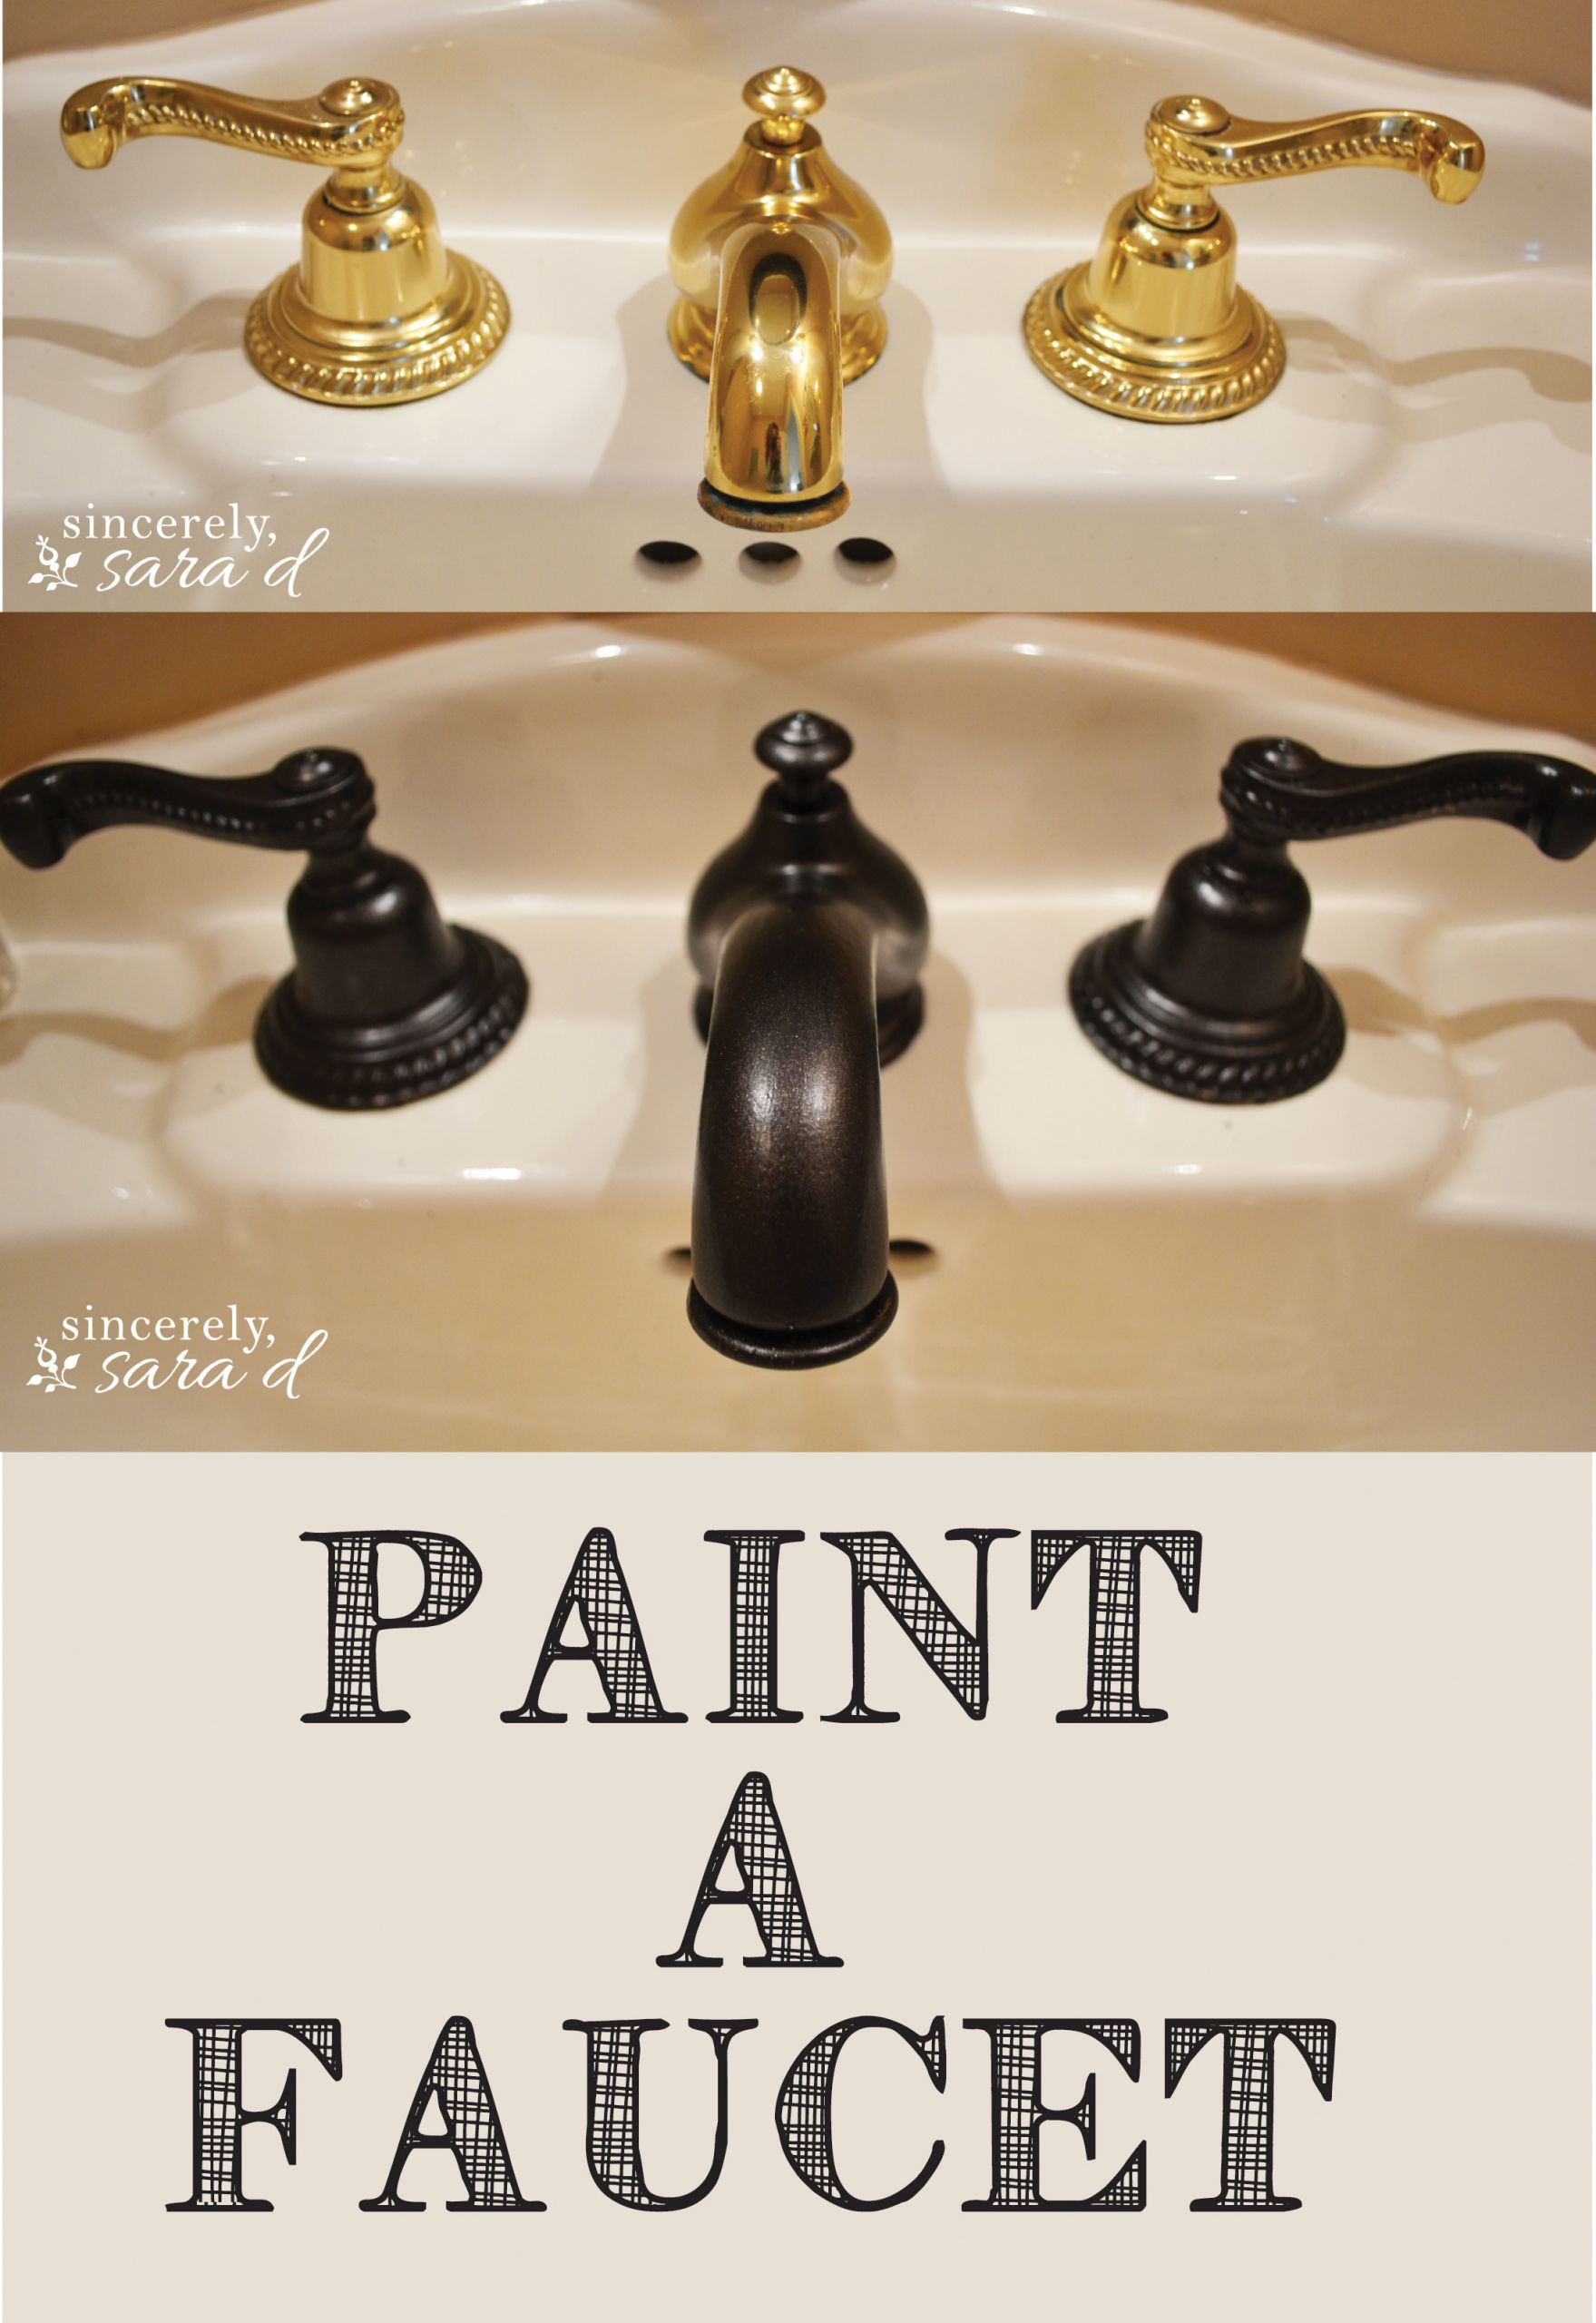 Spray Paint Bathroom Fixtures
 How to Paint a Faucet